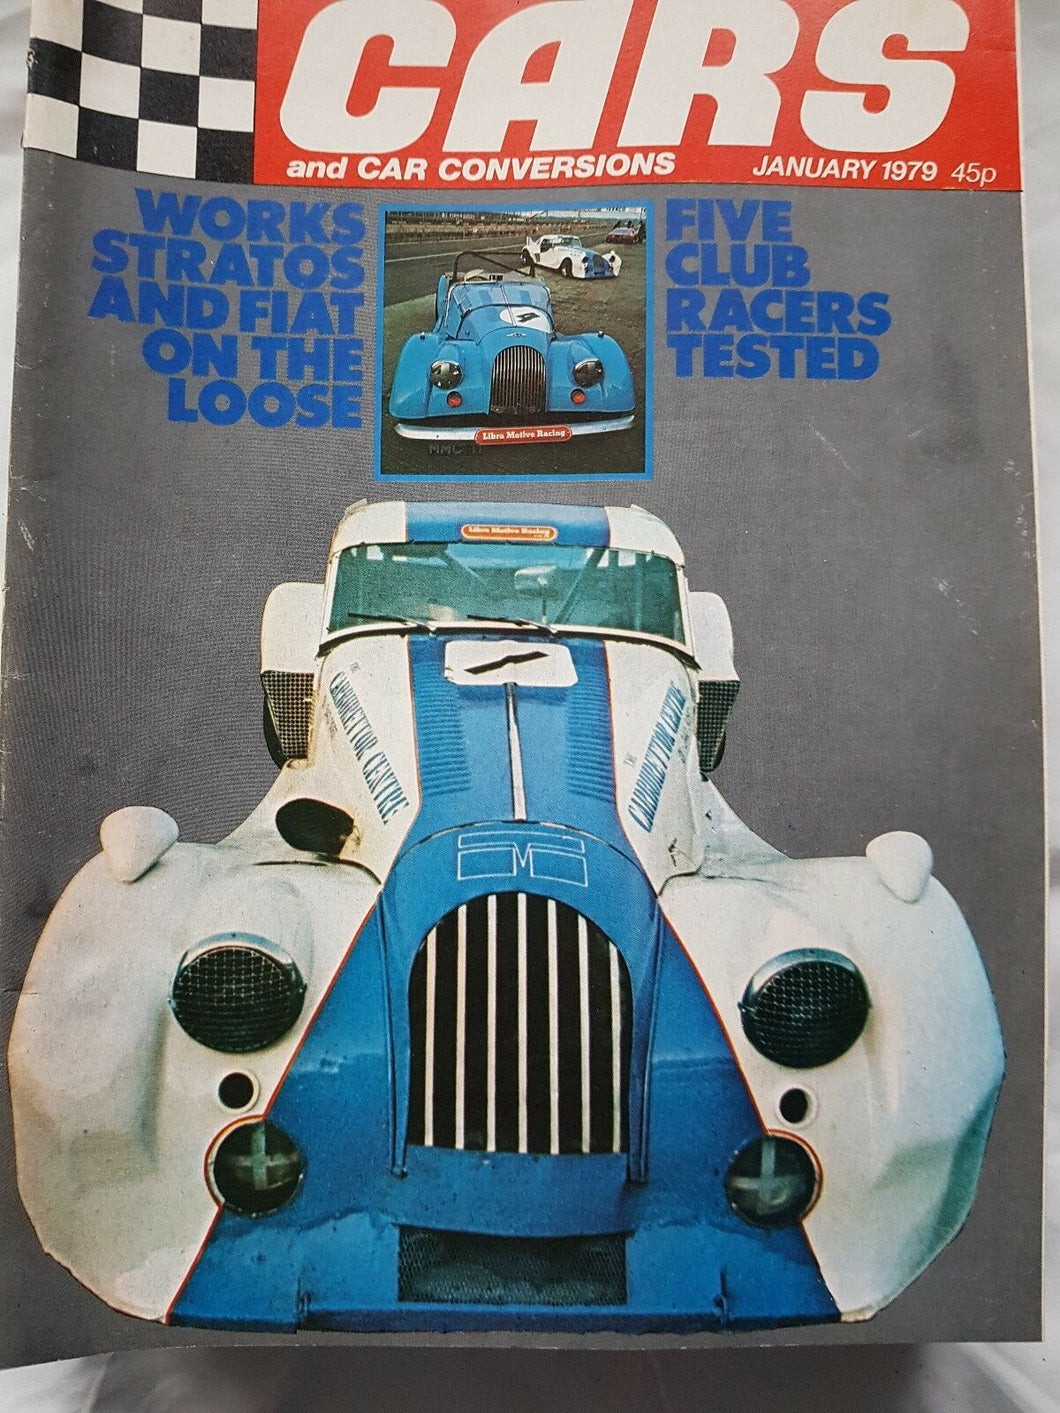 Cars and car conversions January 1979 Stratos Fiat 5 Club racers